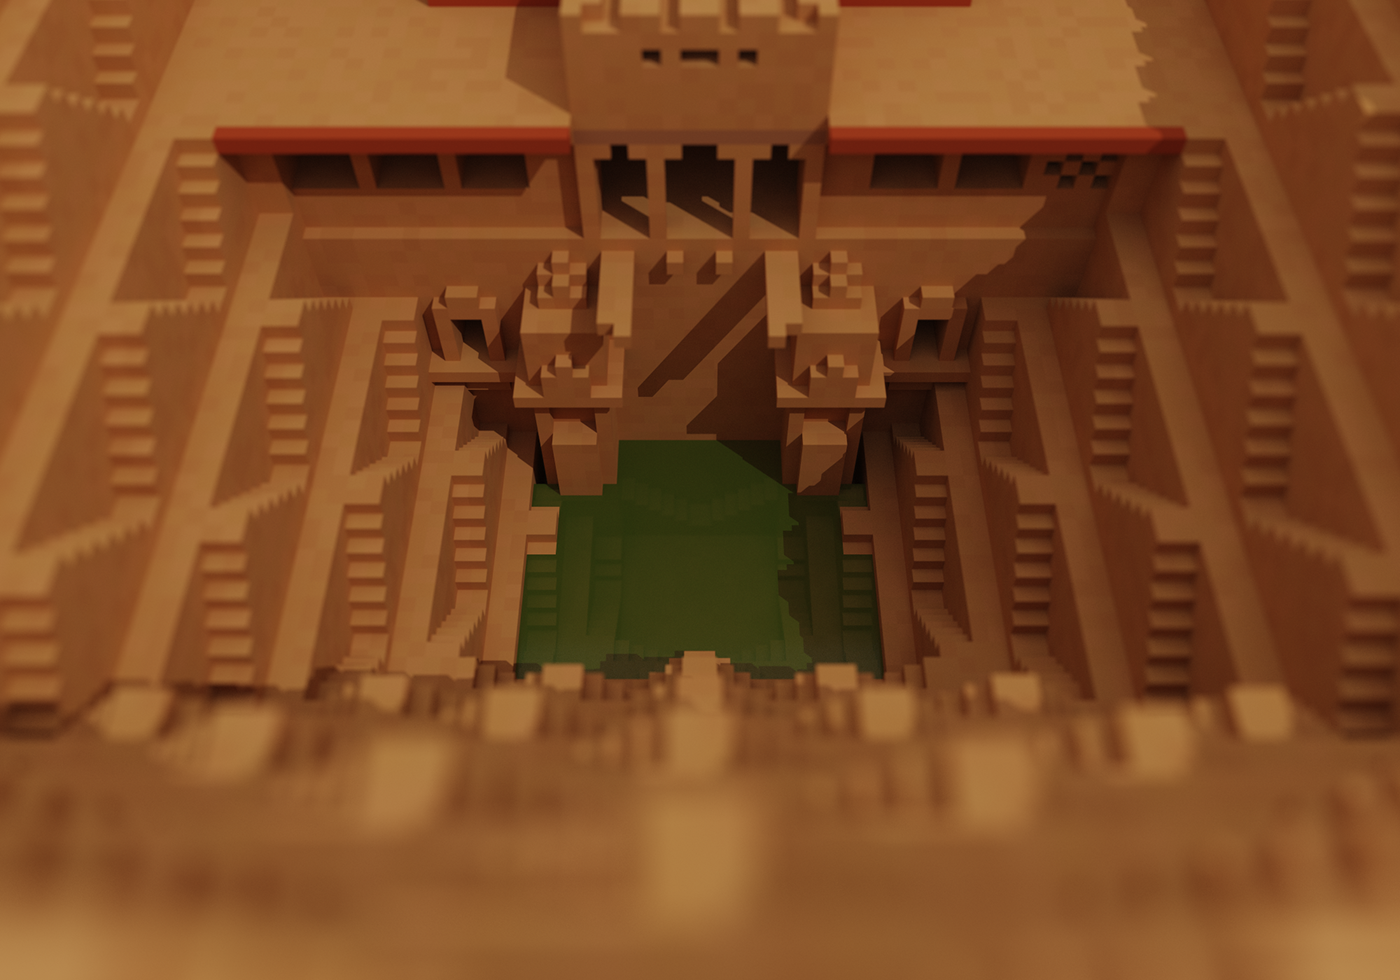 voxel art voxel chand baori Rajasthan India Step Well well Magicavoxel